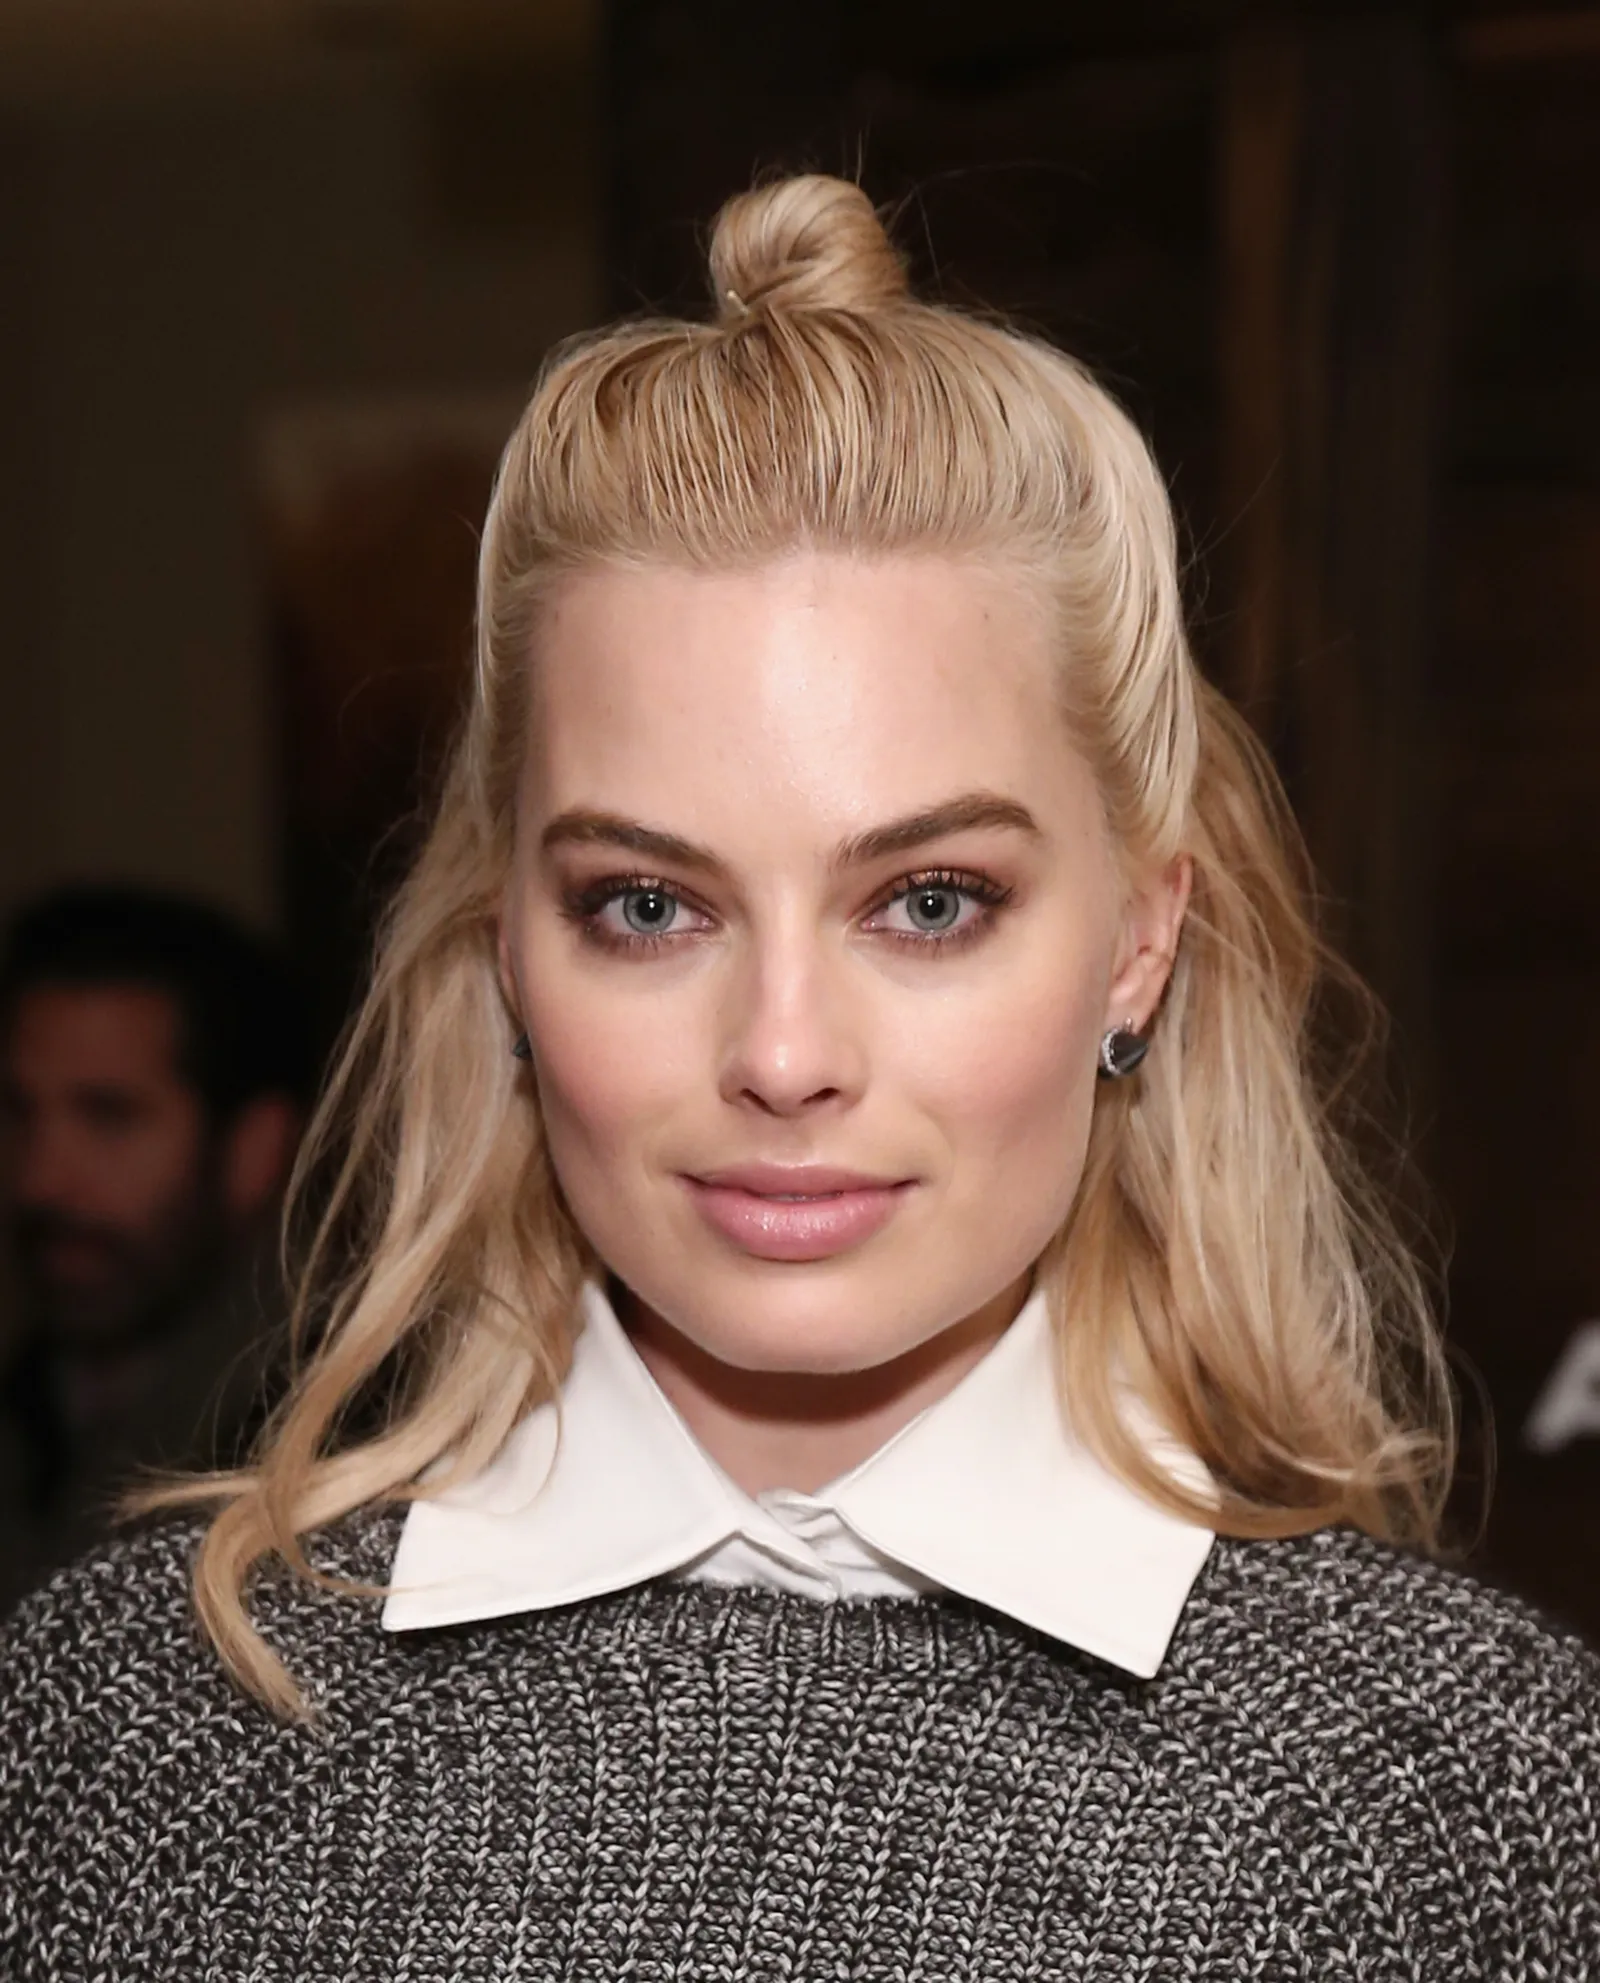 Slicked-back Top Knot with a Half-up Hairstyle